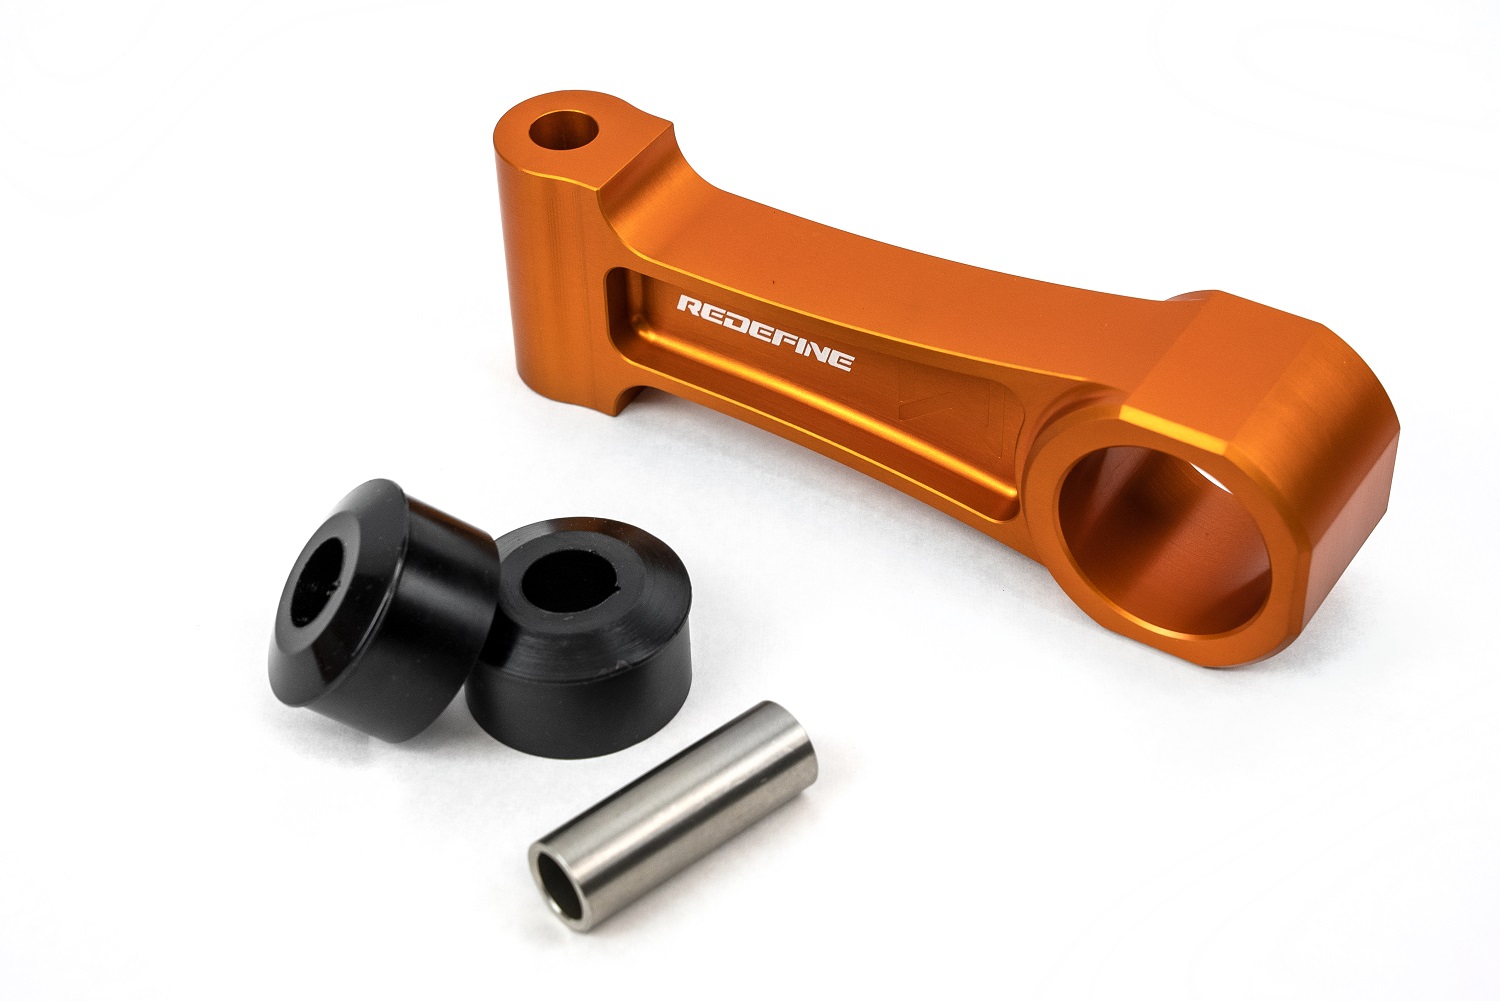 steel-sleeve-poly-and-black-bushings-laid-out-to-compare